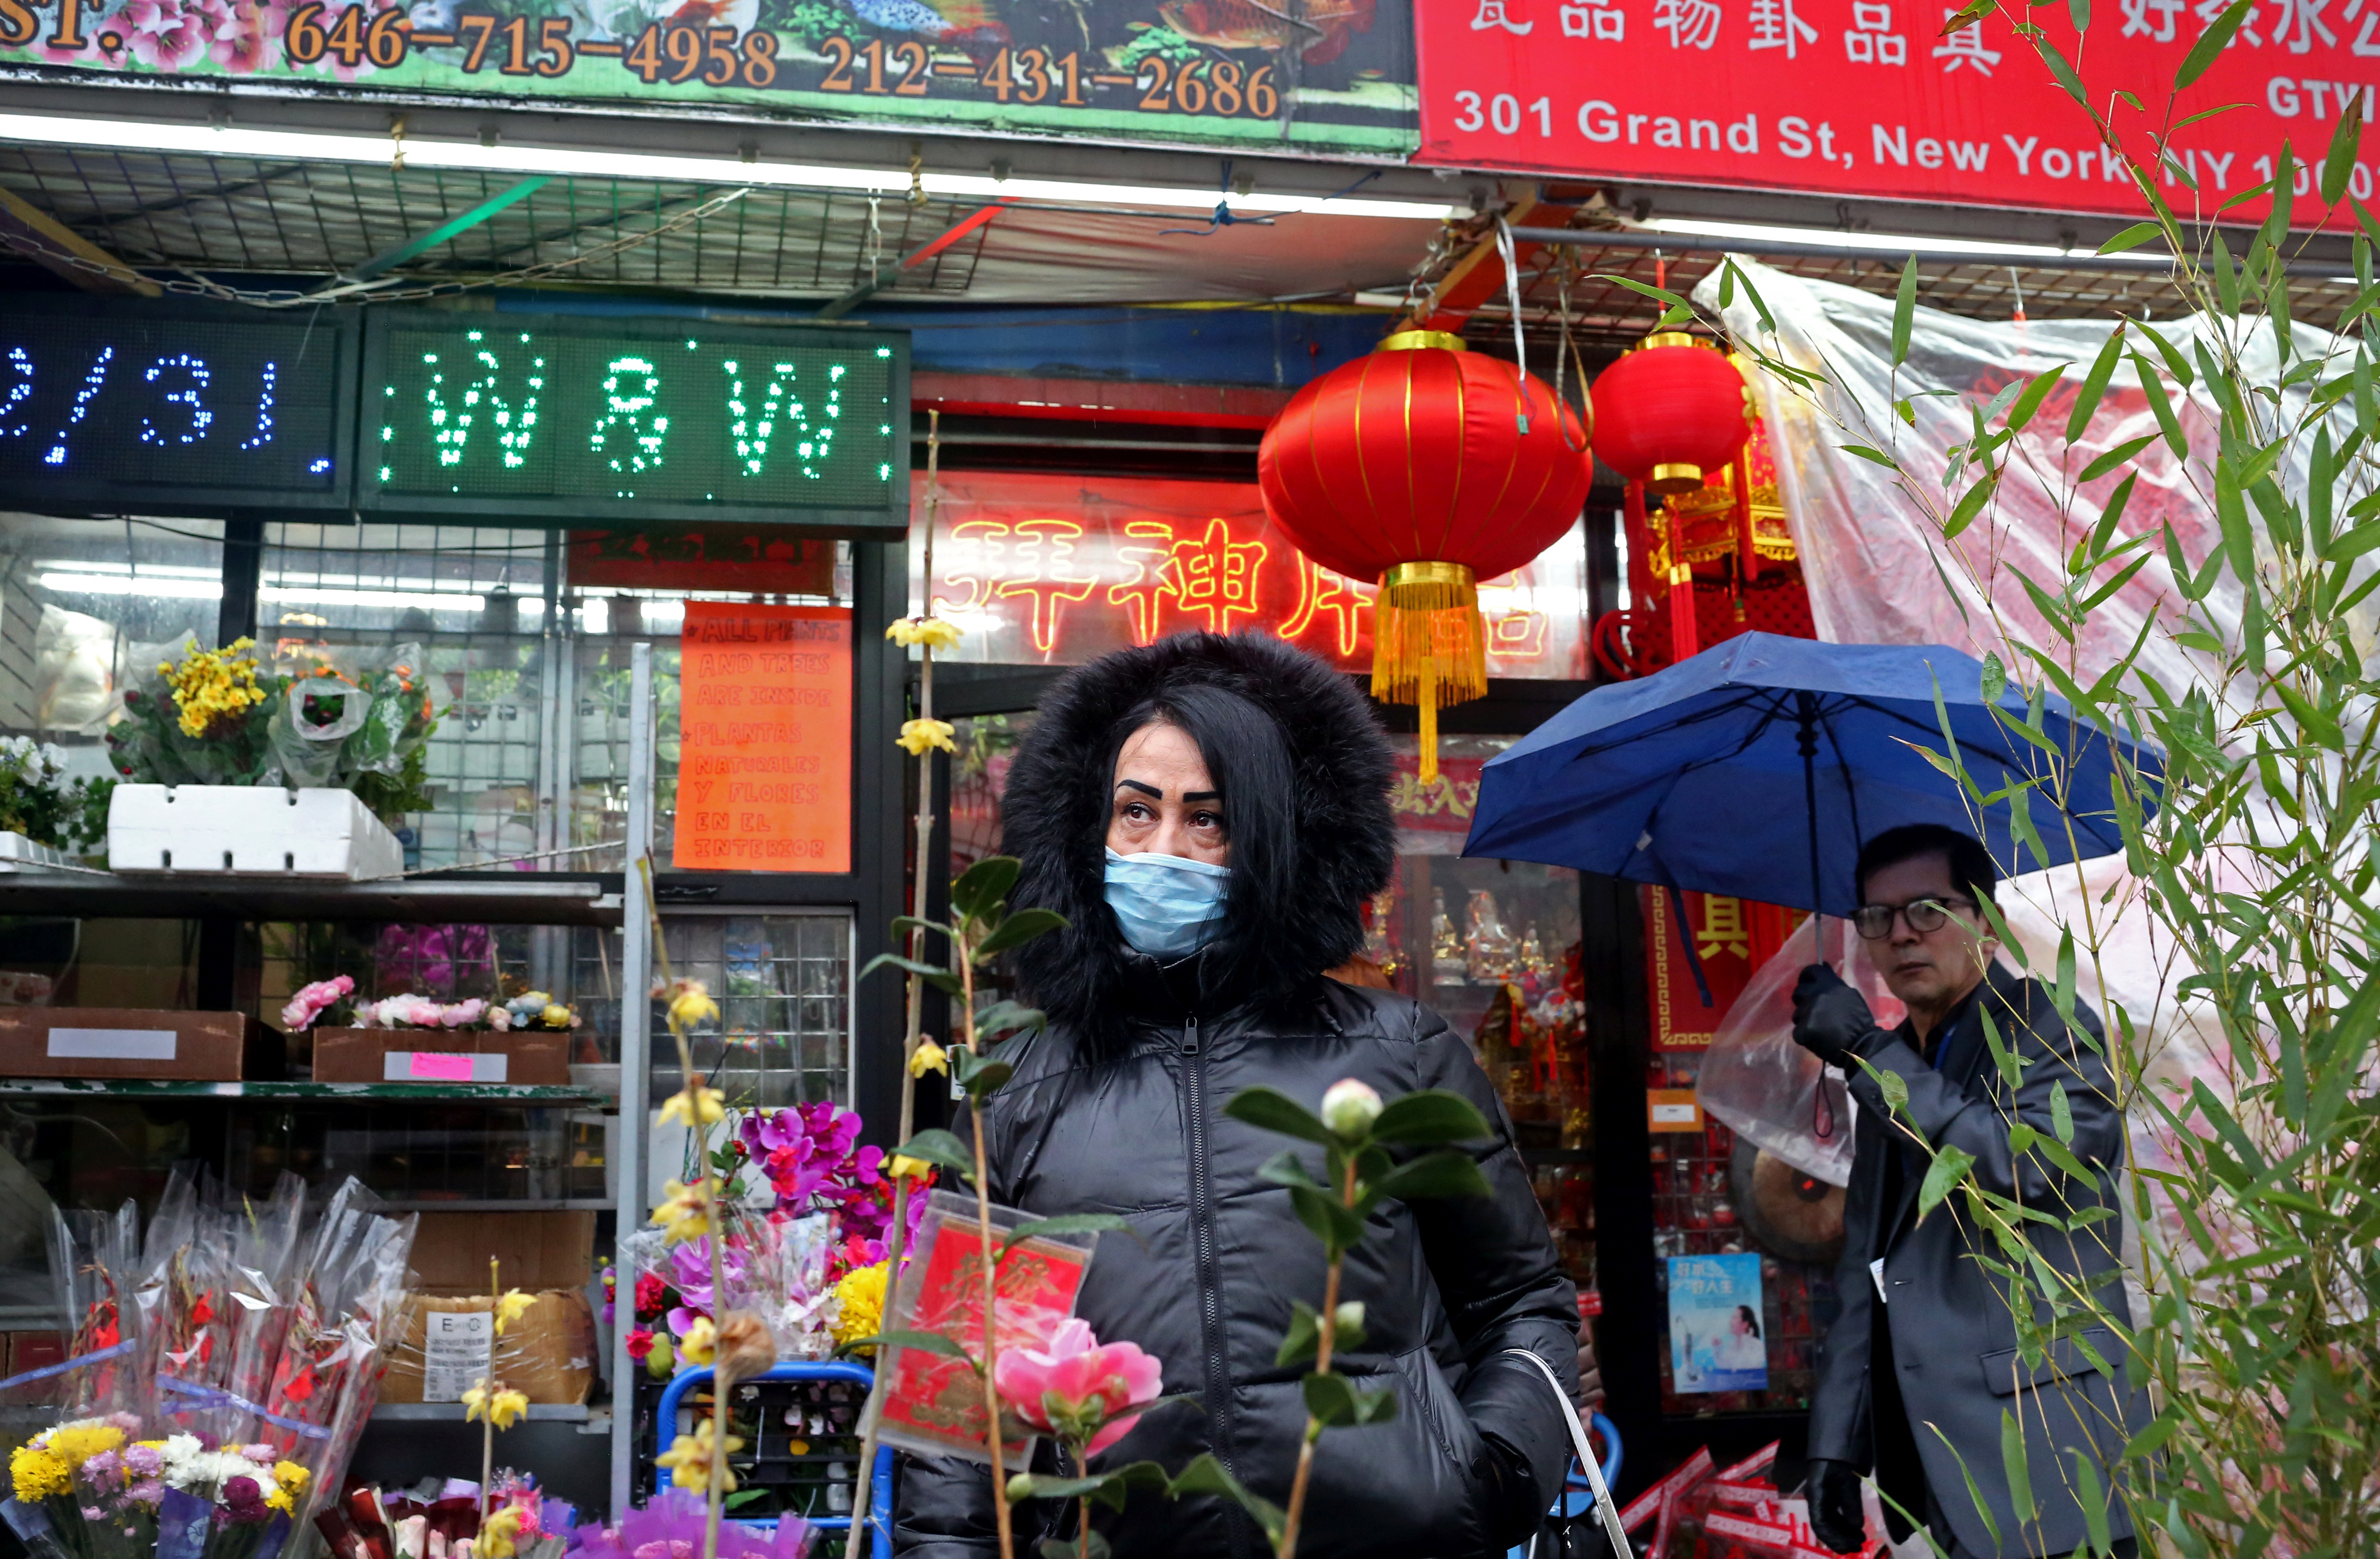 A woman, wearing a mask to protect herself against coronavirus transmission, poses for a photo in New York’s Chinatown on February 13. There are no confirmed coronavirus cases in New York City. Photo: Reuters